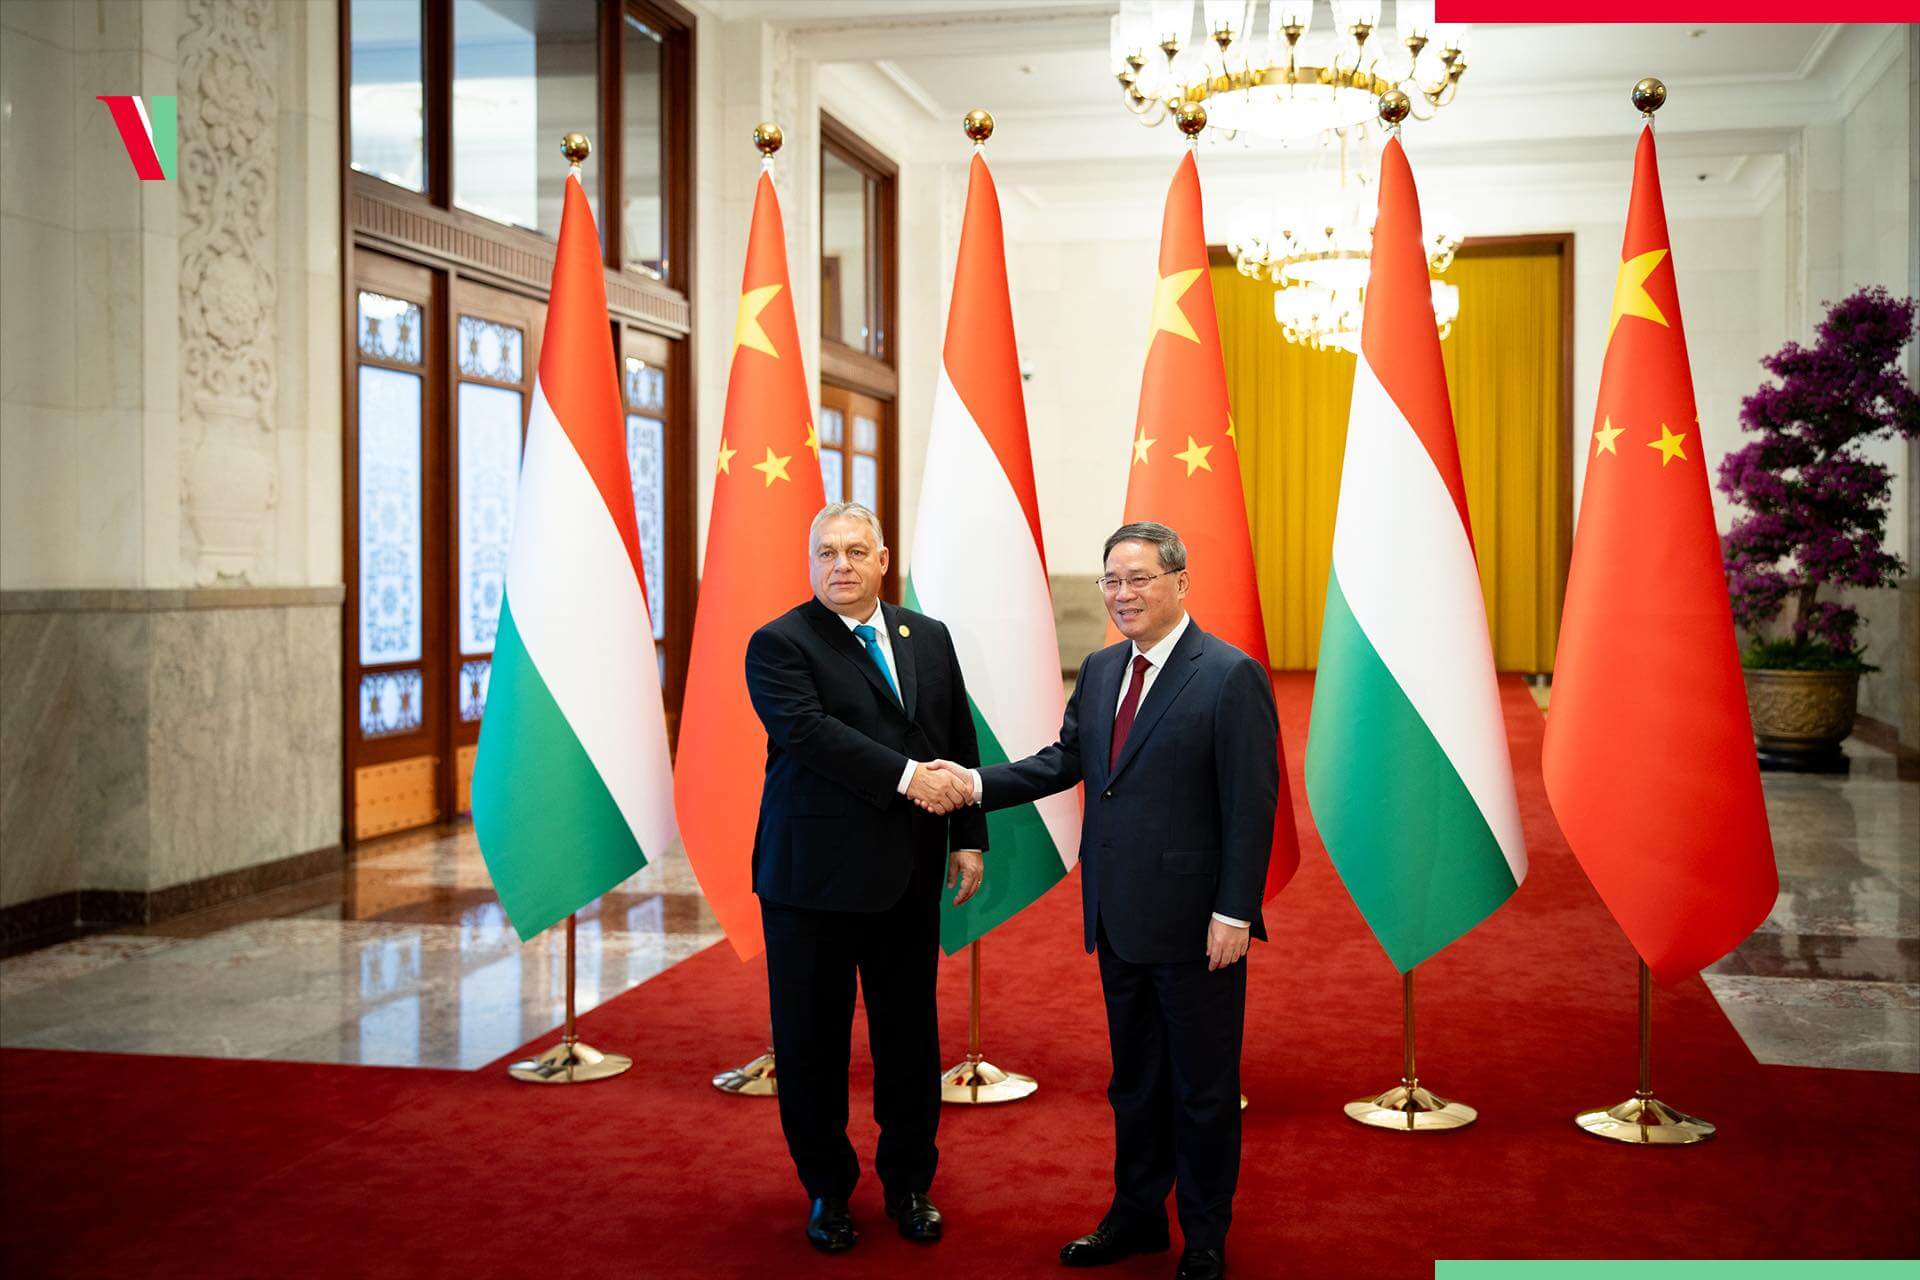 Hungary Pins High Hopes on Cooperation with China